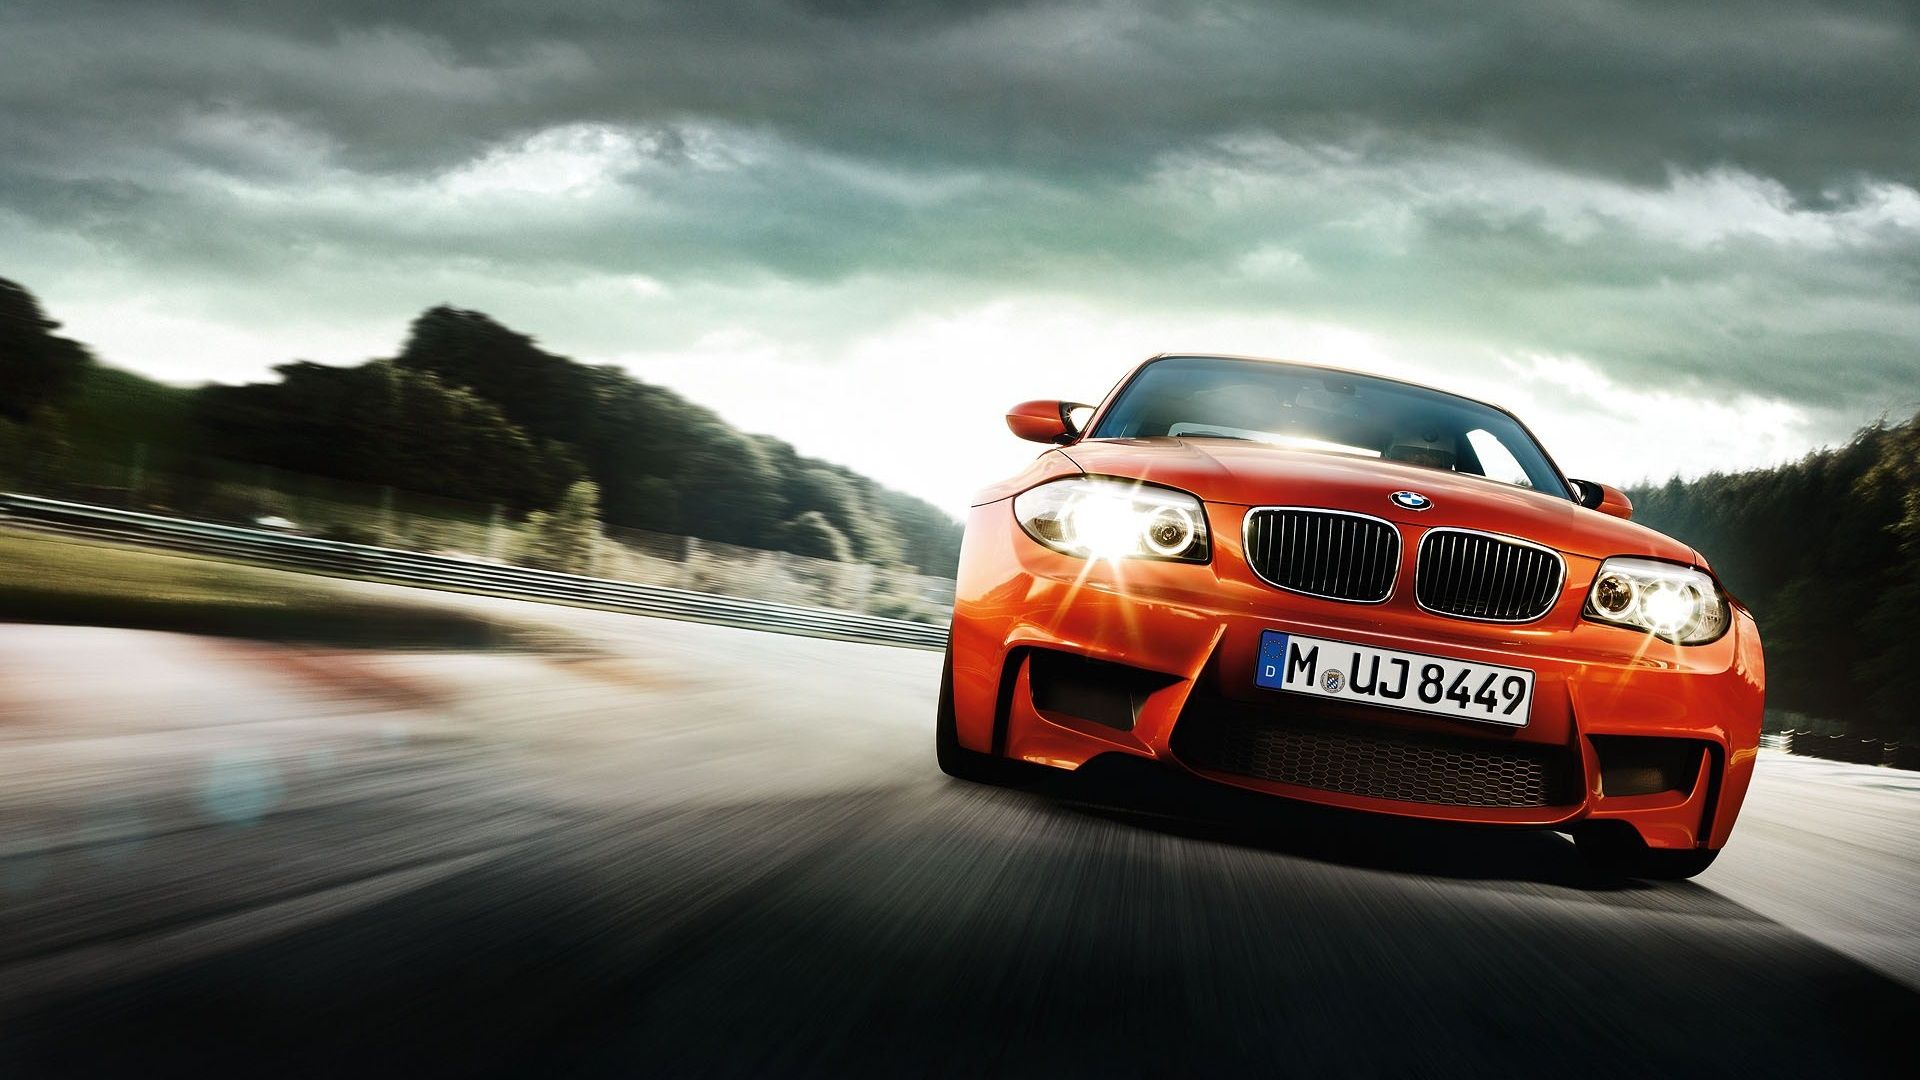 Bmw Car Wallpaper Hd Download realityismymind